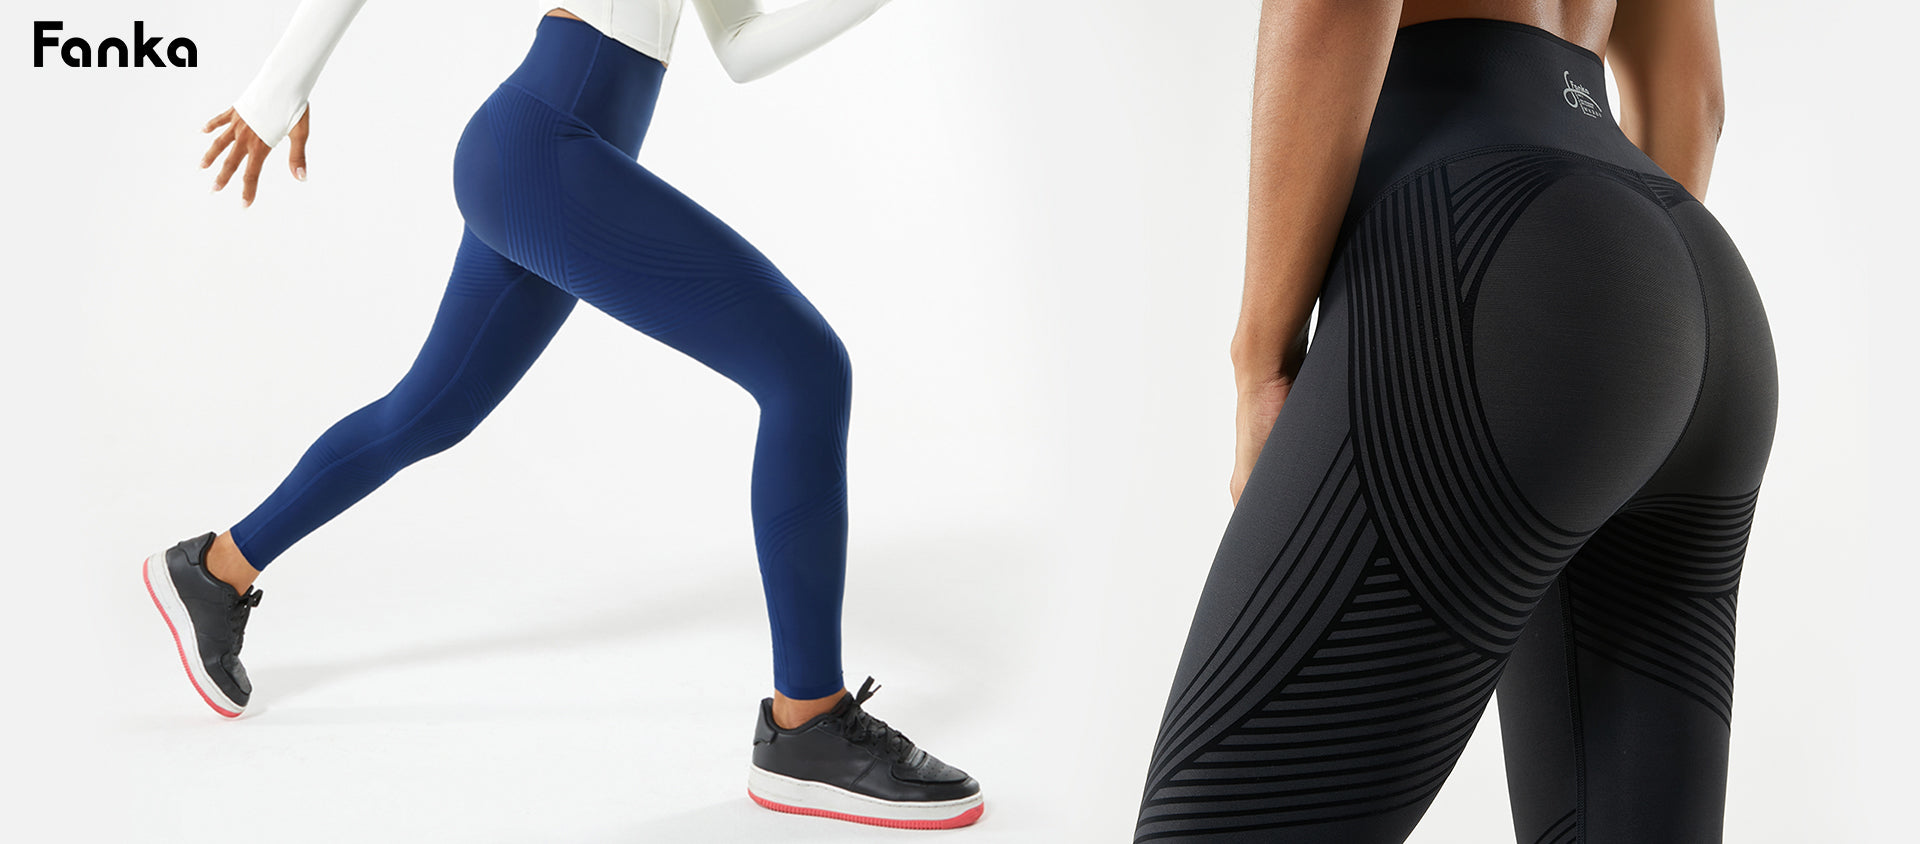 Benefits Of Wearing Waist Compression Leggings During The Workout